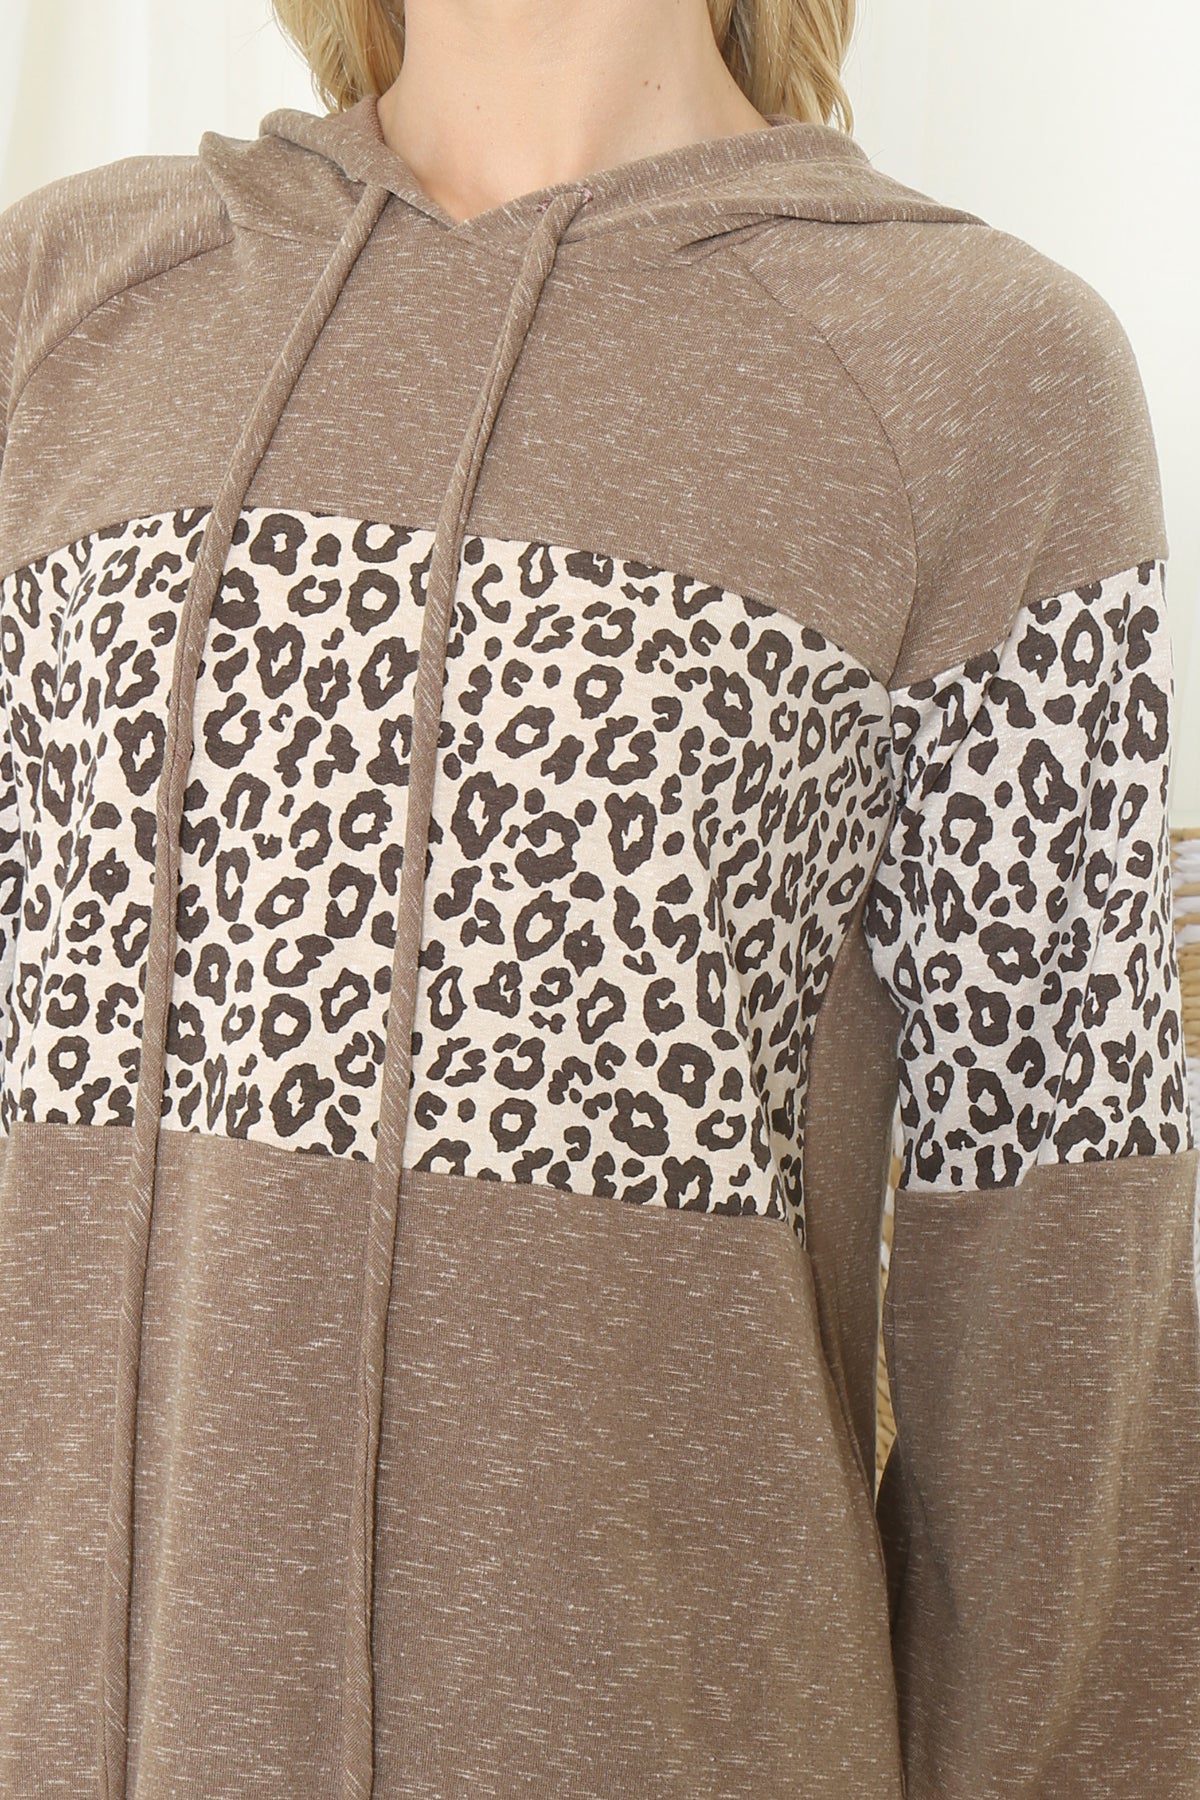 PPT21514-MCTP - ANIMAL PRINT CONTRAST PUFF SLEEVE HOODIE TOP- MOCHA-TAUPE 1-1-1-1